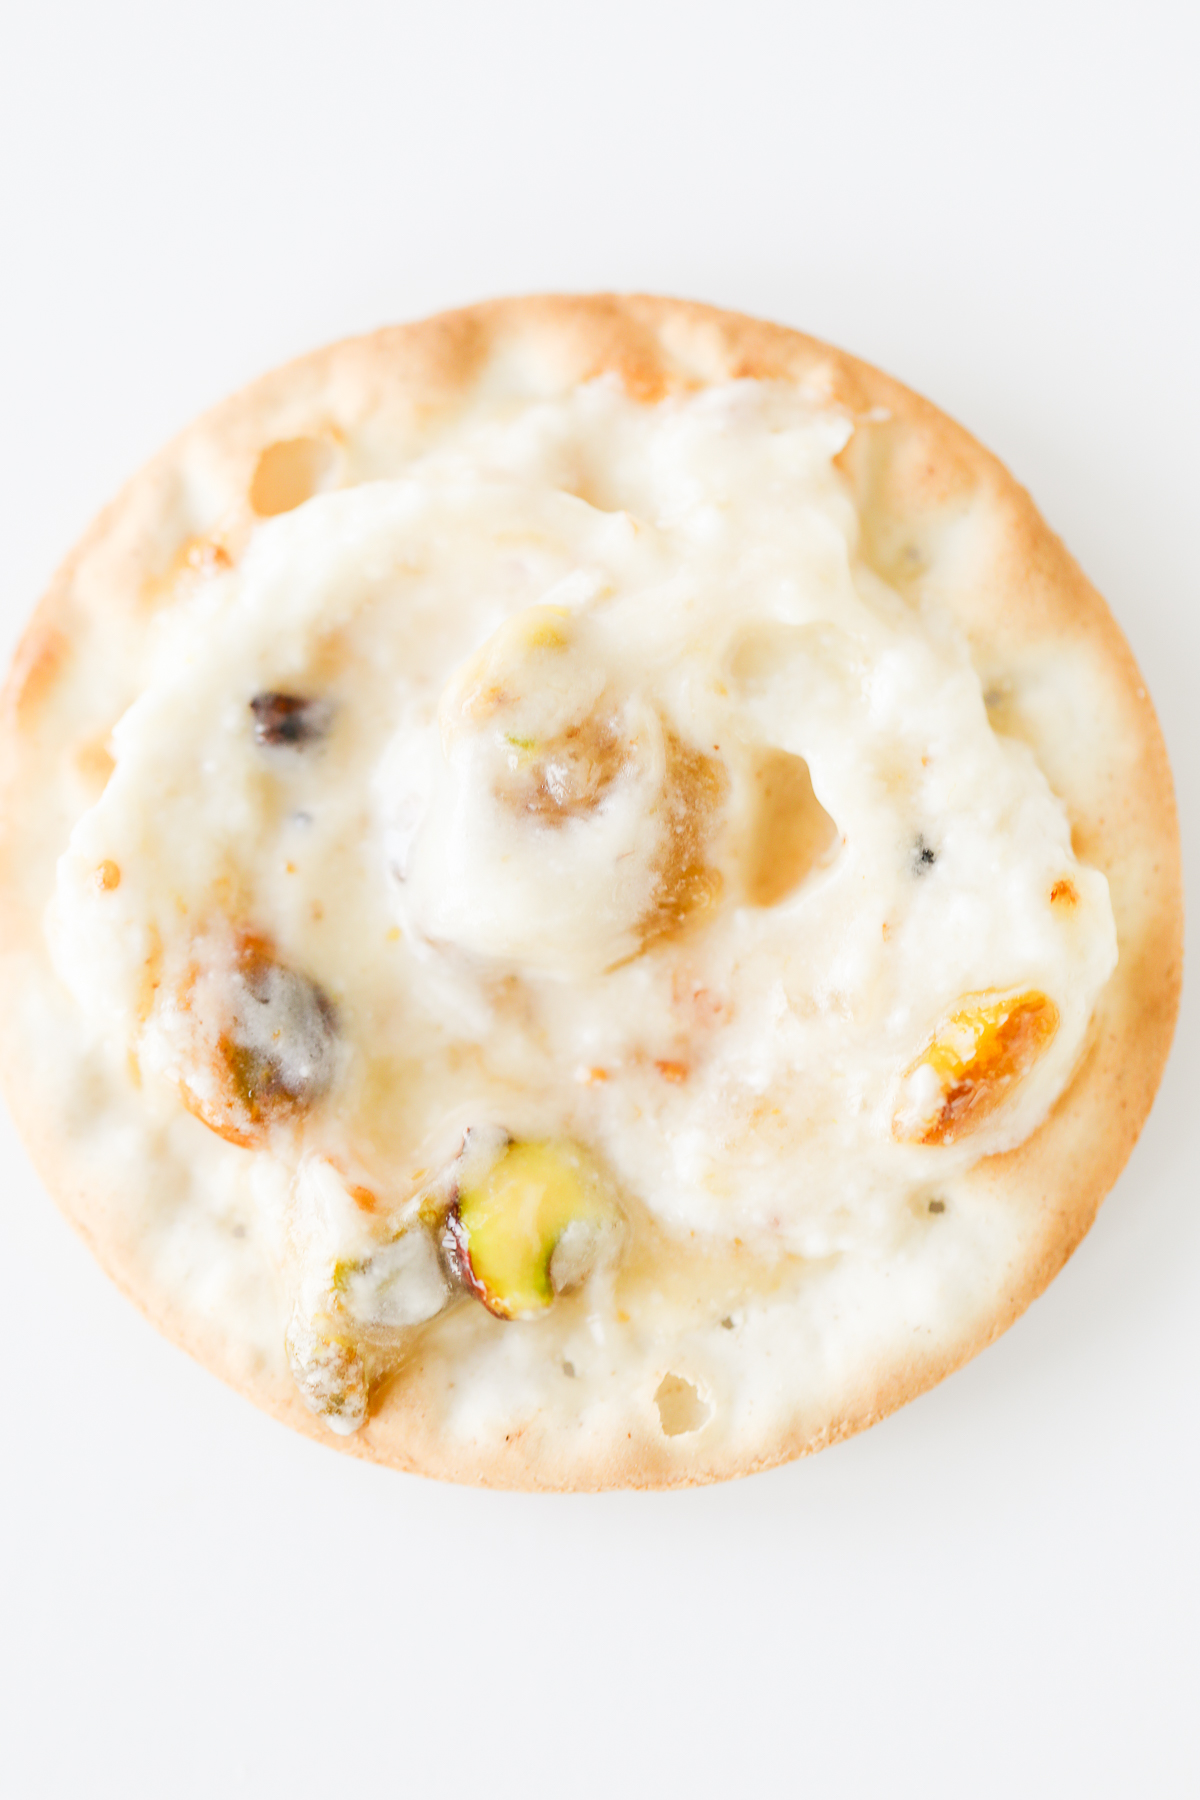 A cracker with goat cheese and pistachios on it.